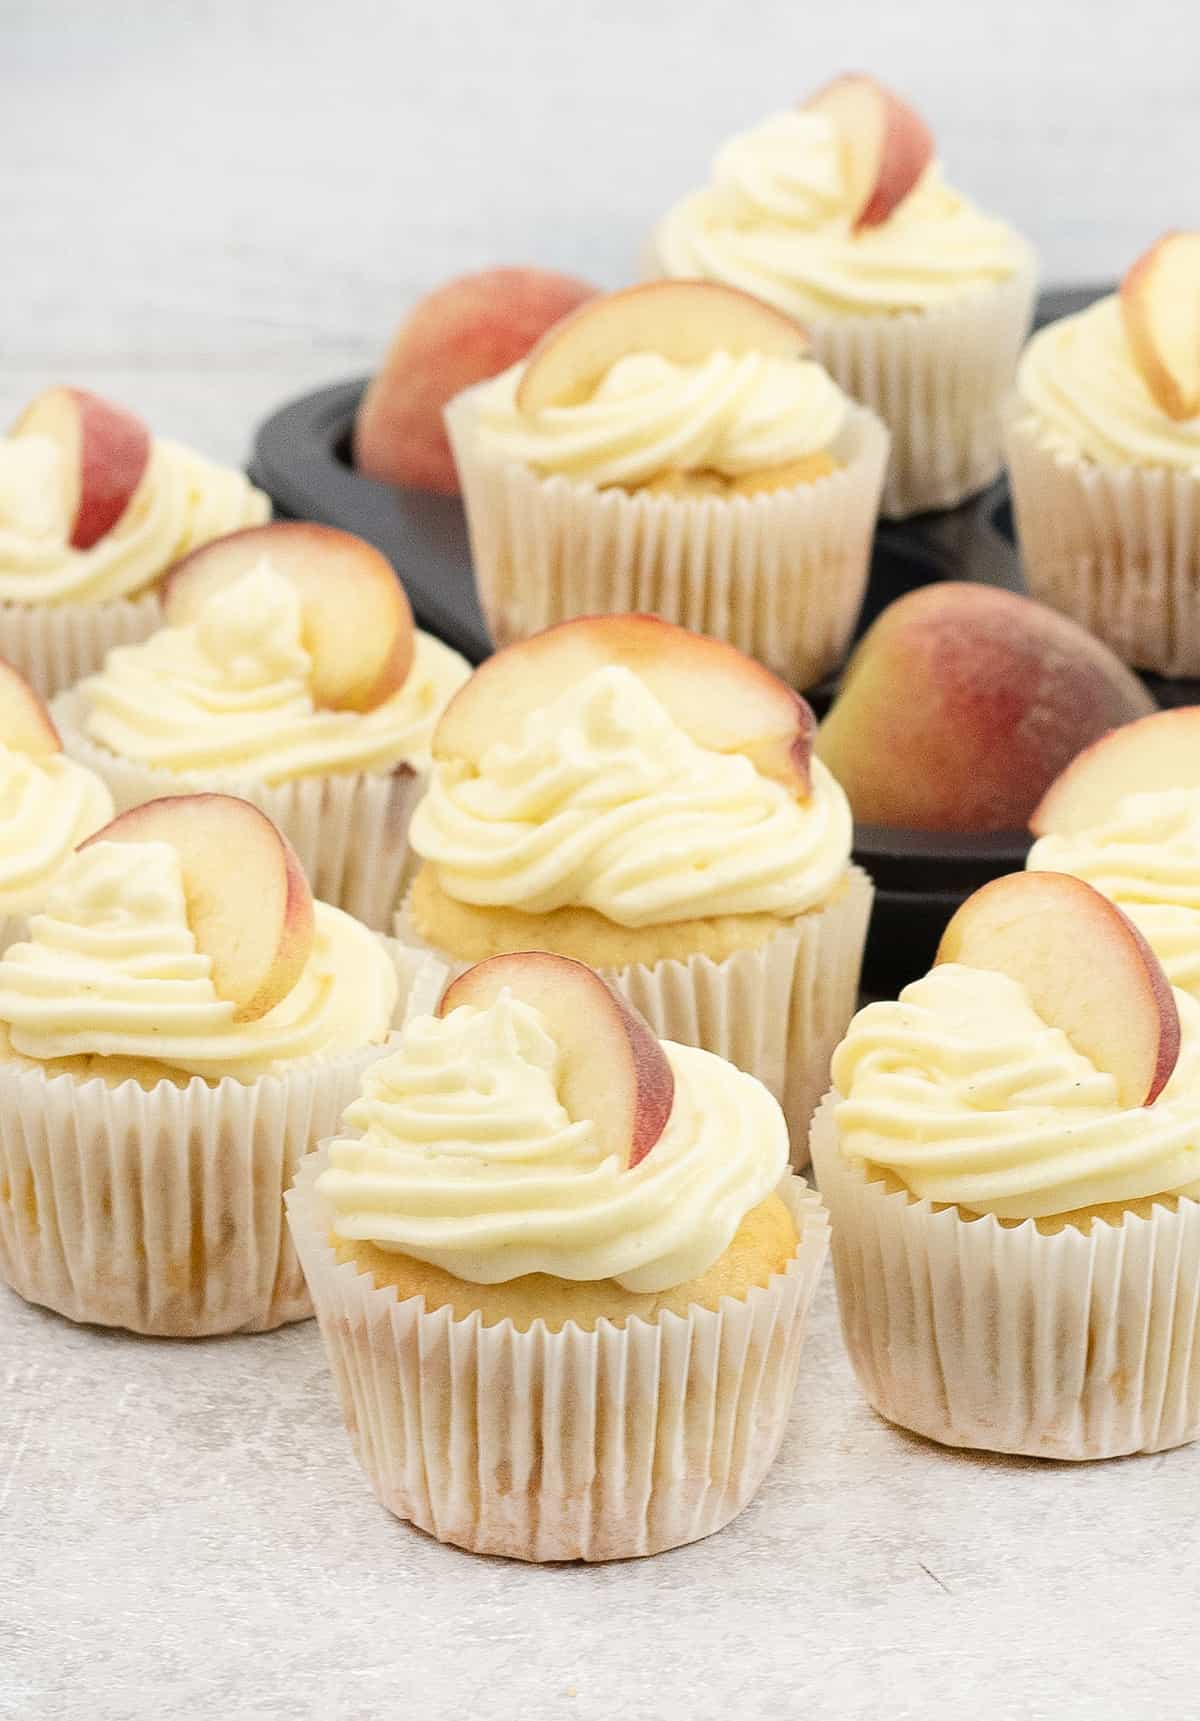 Peach Cupcakes topped wit fresh peach slice